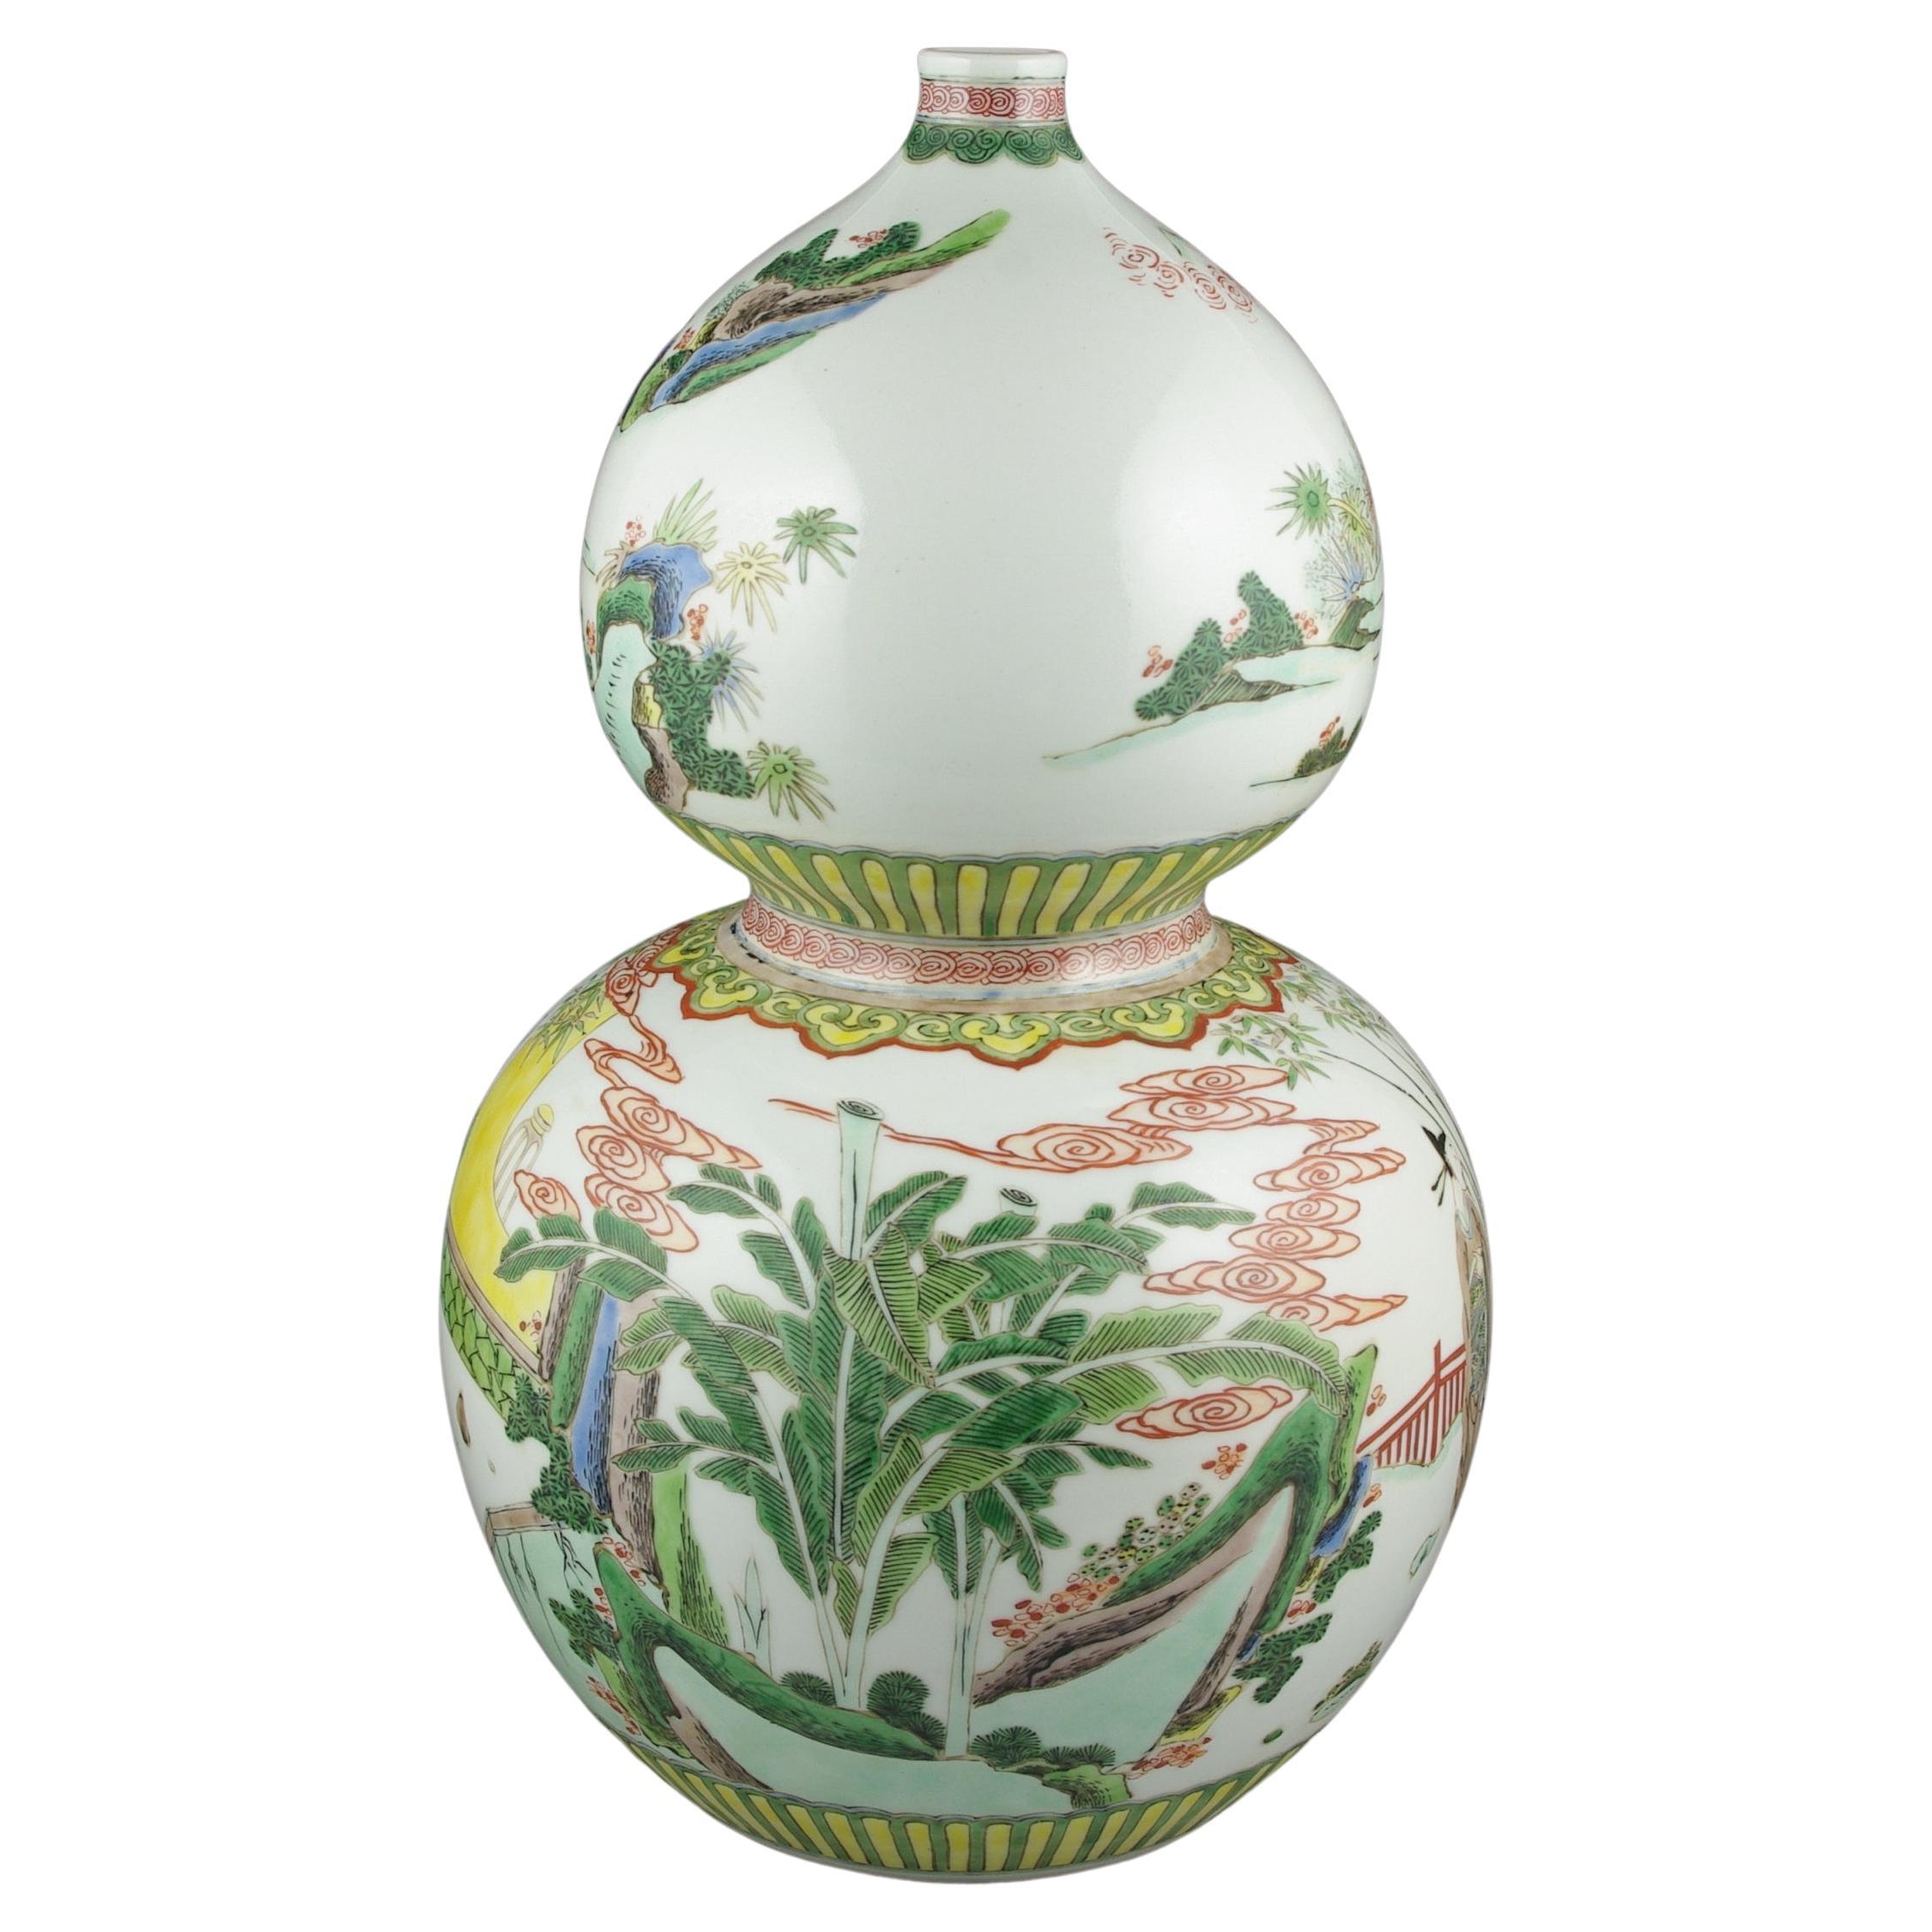 Huge Antique Chinese Porcelain Famille Rose Fencai Double Gourd Vase 19c Qing In Good Condition For Sale In Richmond, CA